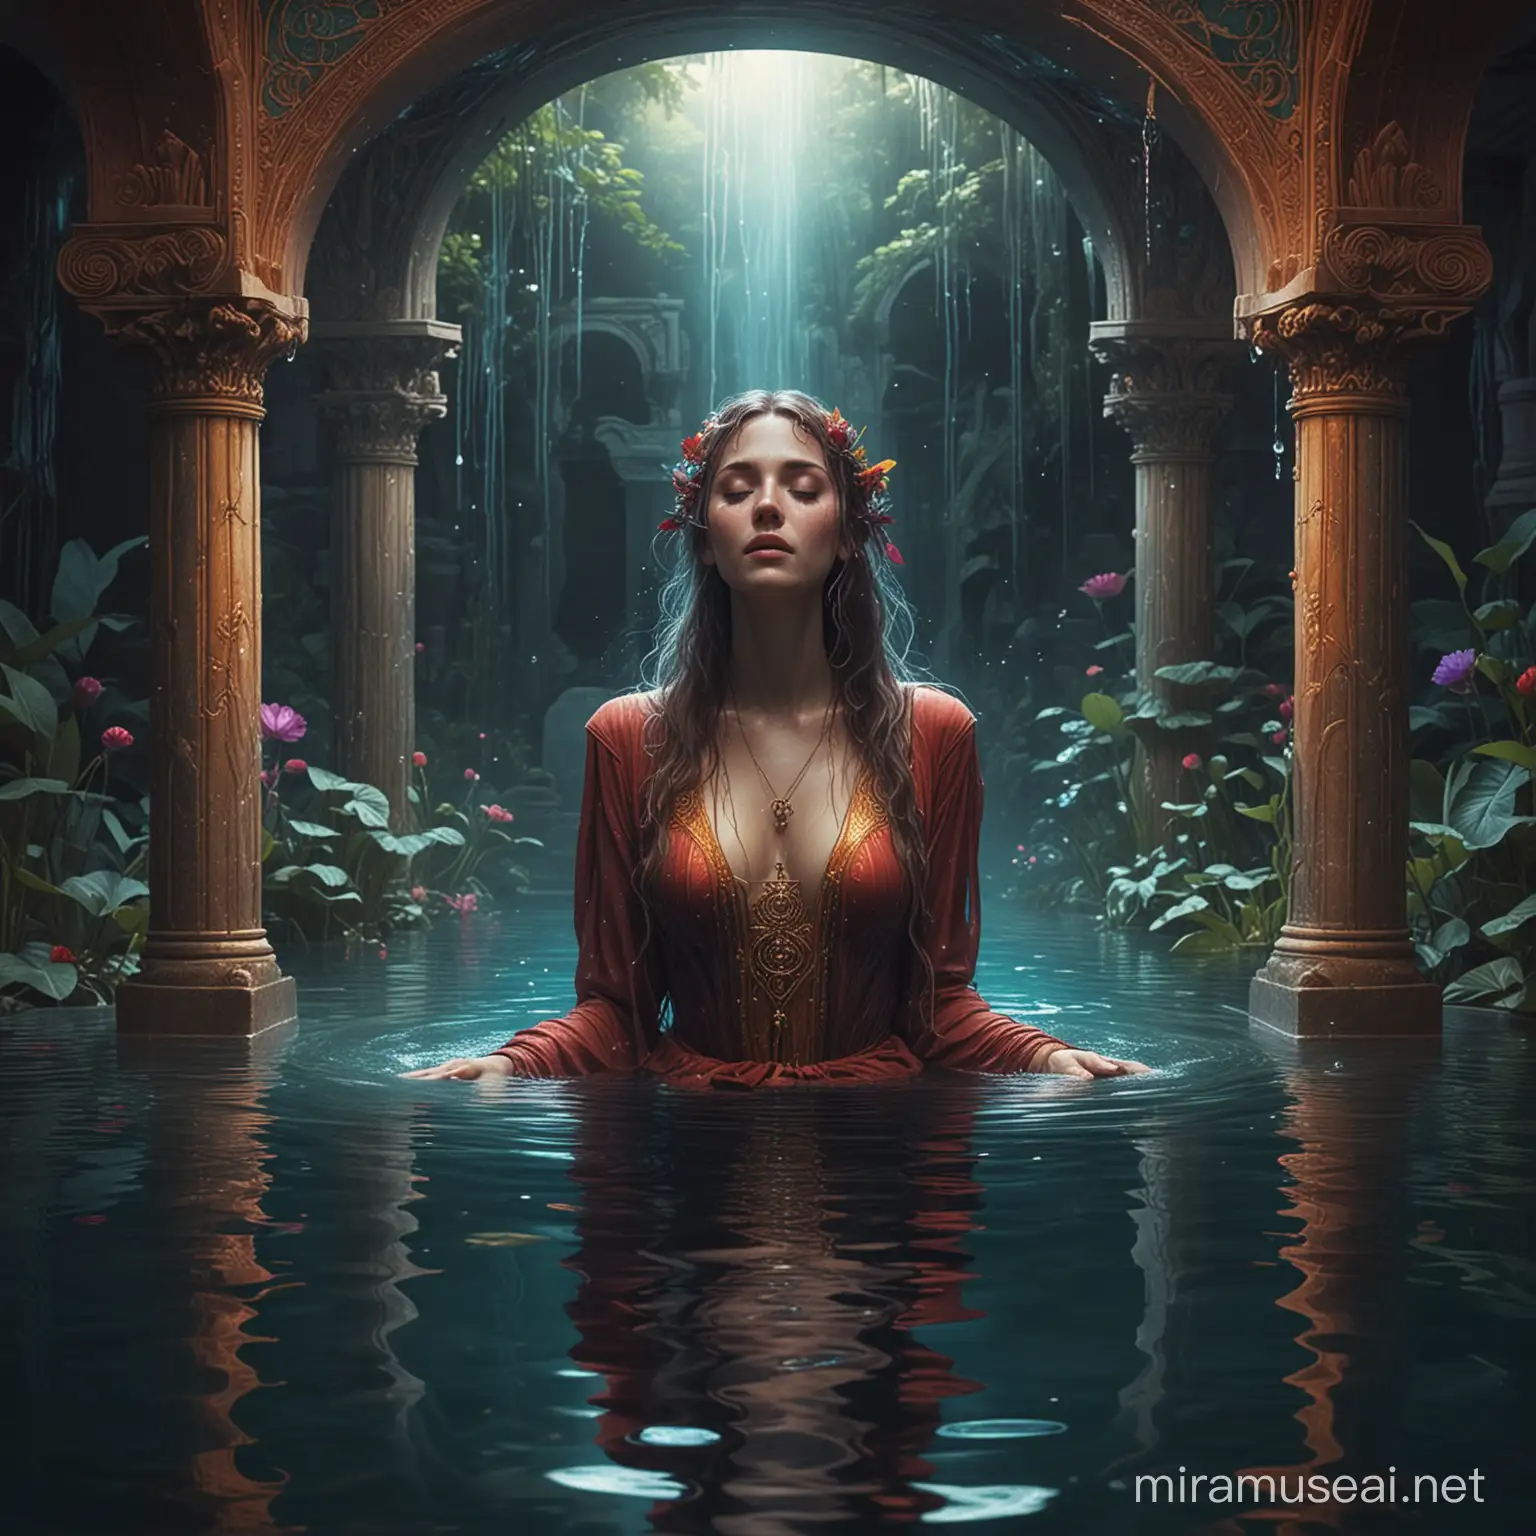 art nouveau style, oracle crying at the edge of a pool of water, magical underground temple, colorful, dark mystical world